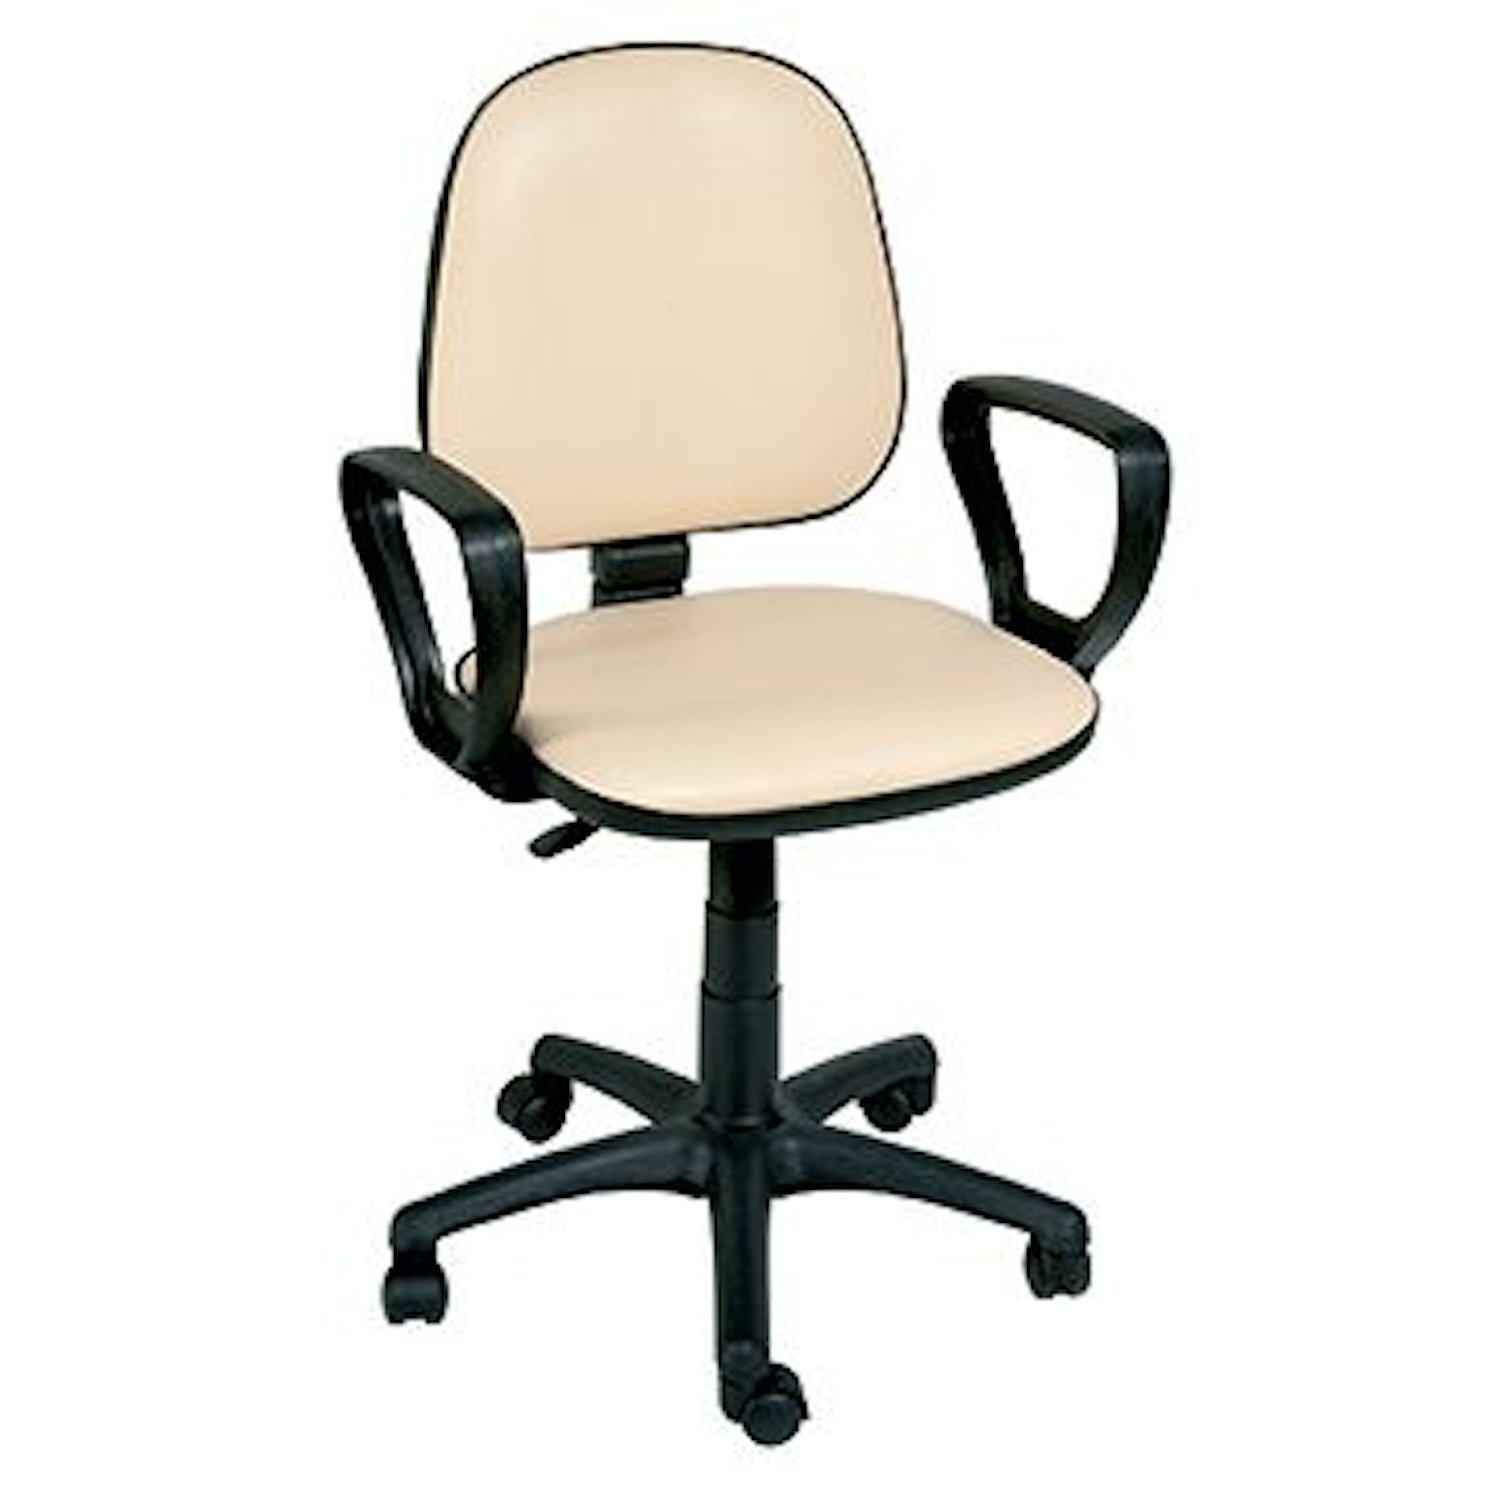 Sunflower Gas-Lift Chair with Arms & Sunflower Gas-Lift Chair With Arms in Black